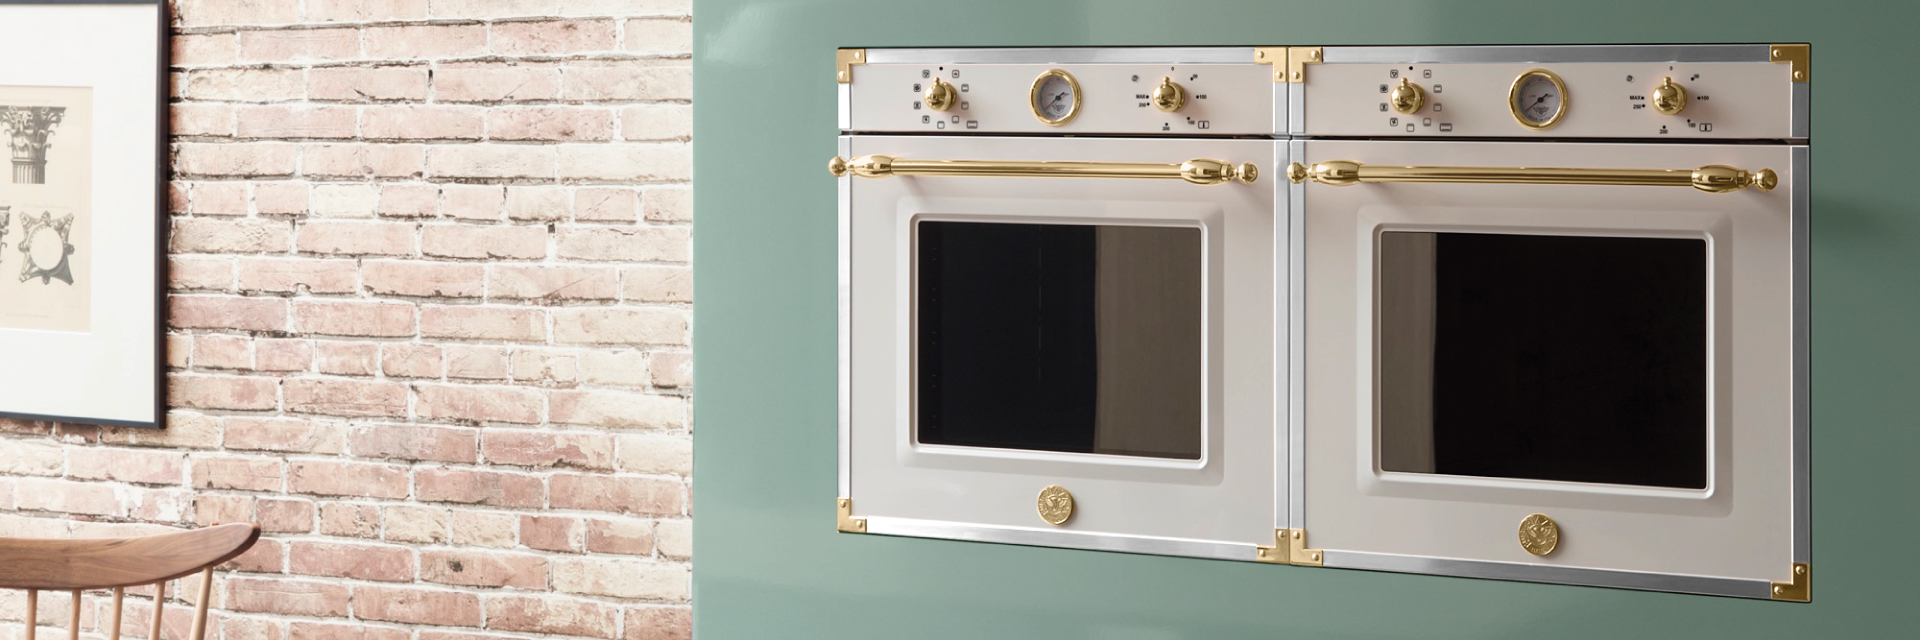 Discover the 60 cm Heritage Series oven, now in the new exclusive Gold finish - Bertazzoni